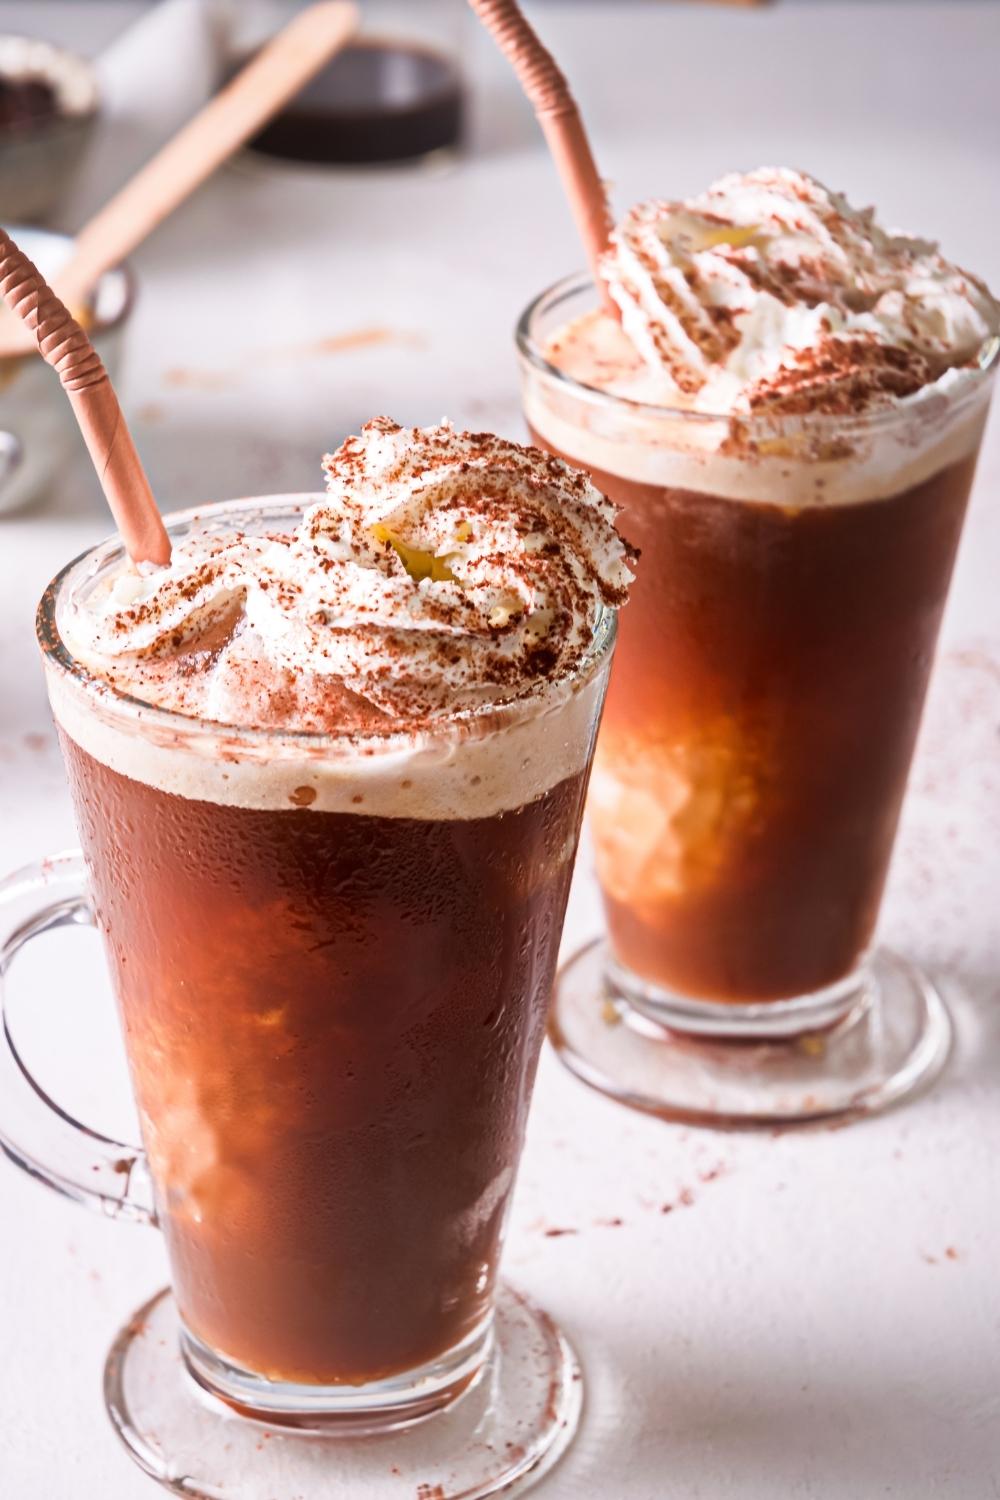 Two tall glasses of homemade McDonald's caramel frappe topped with whipped cream and sprinkled with cinnamon.